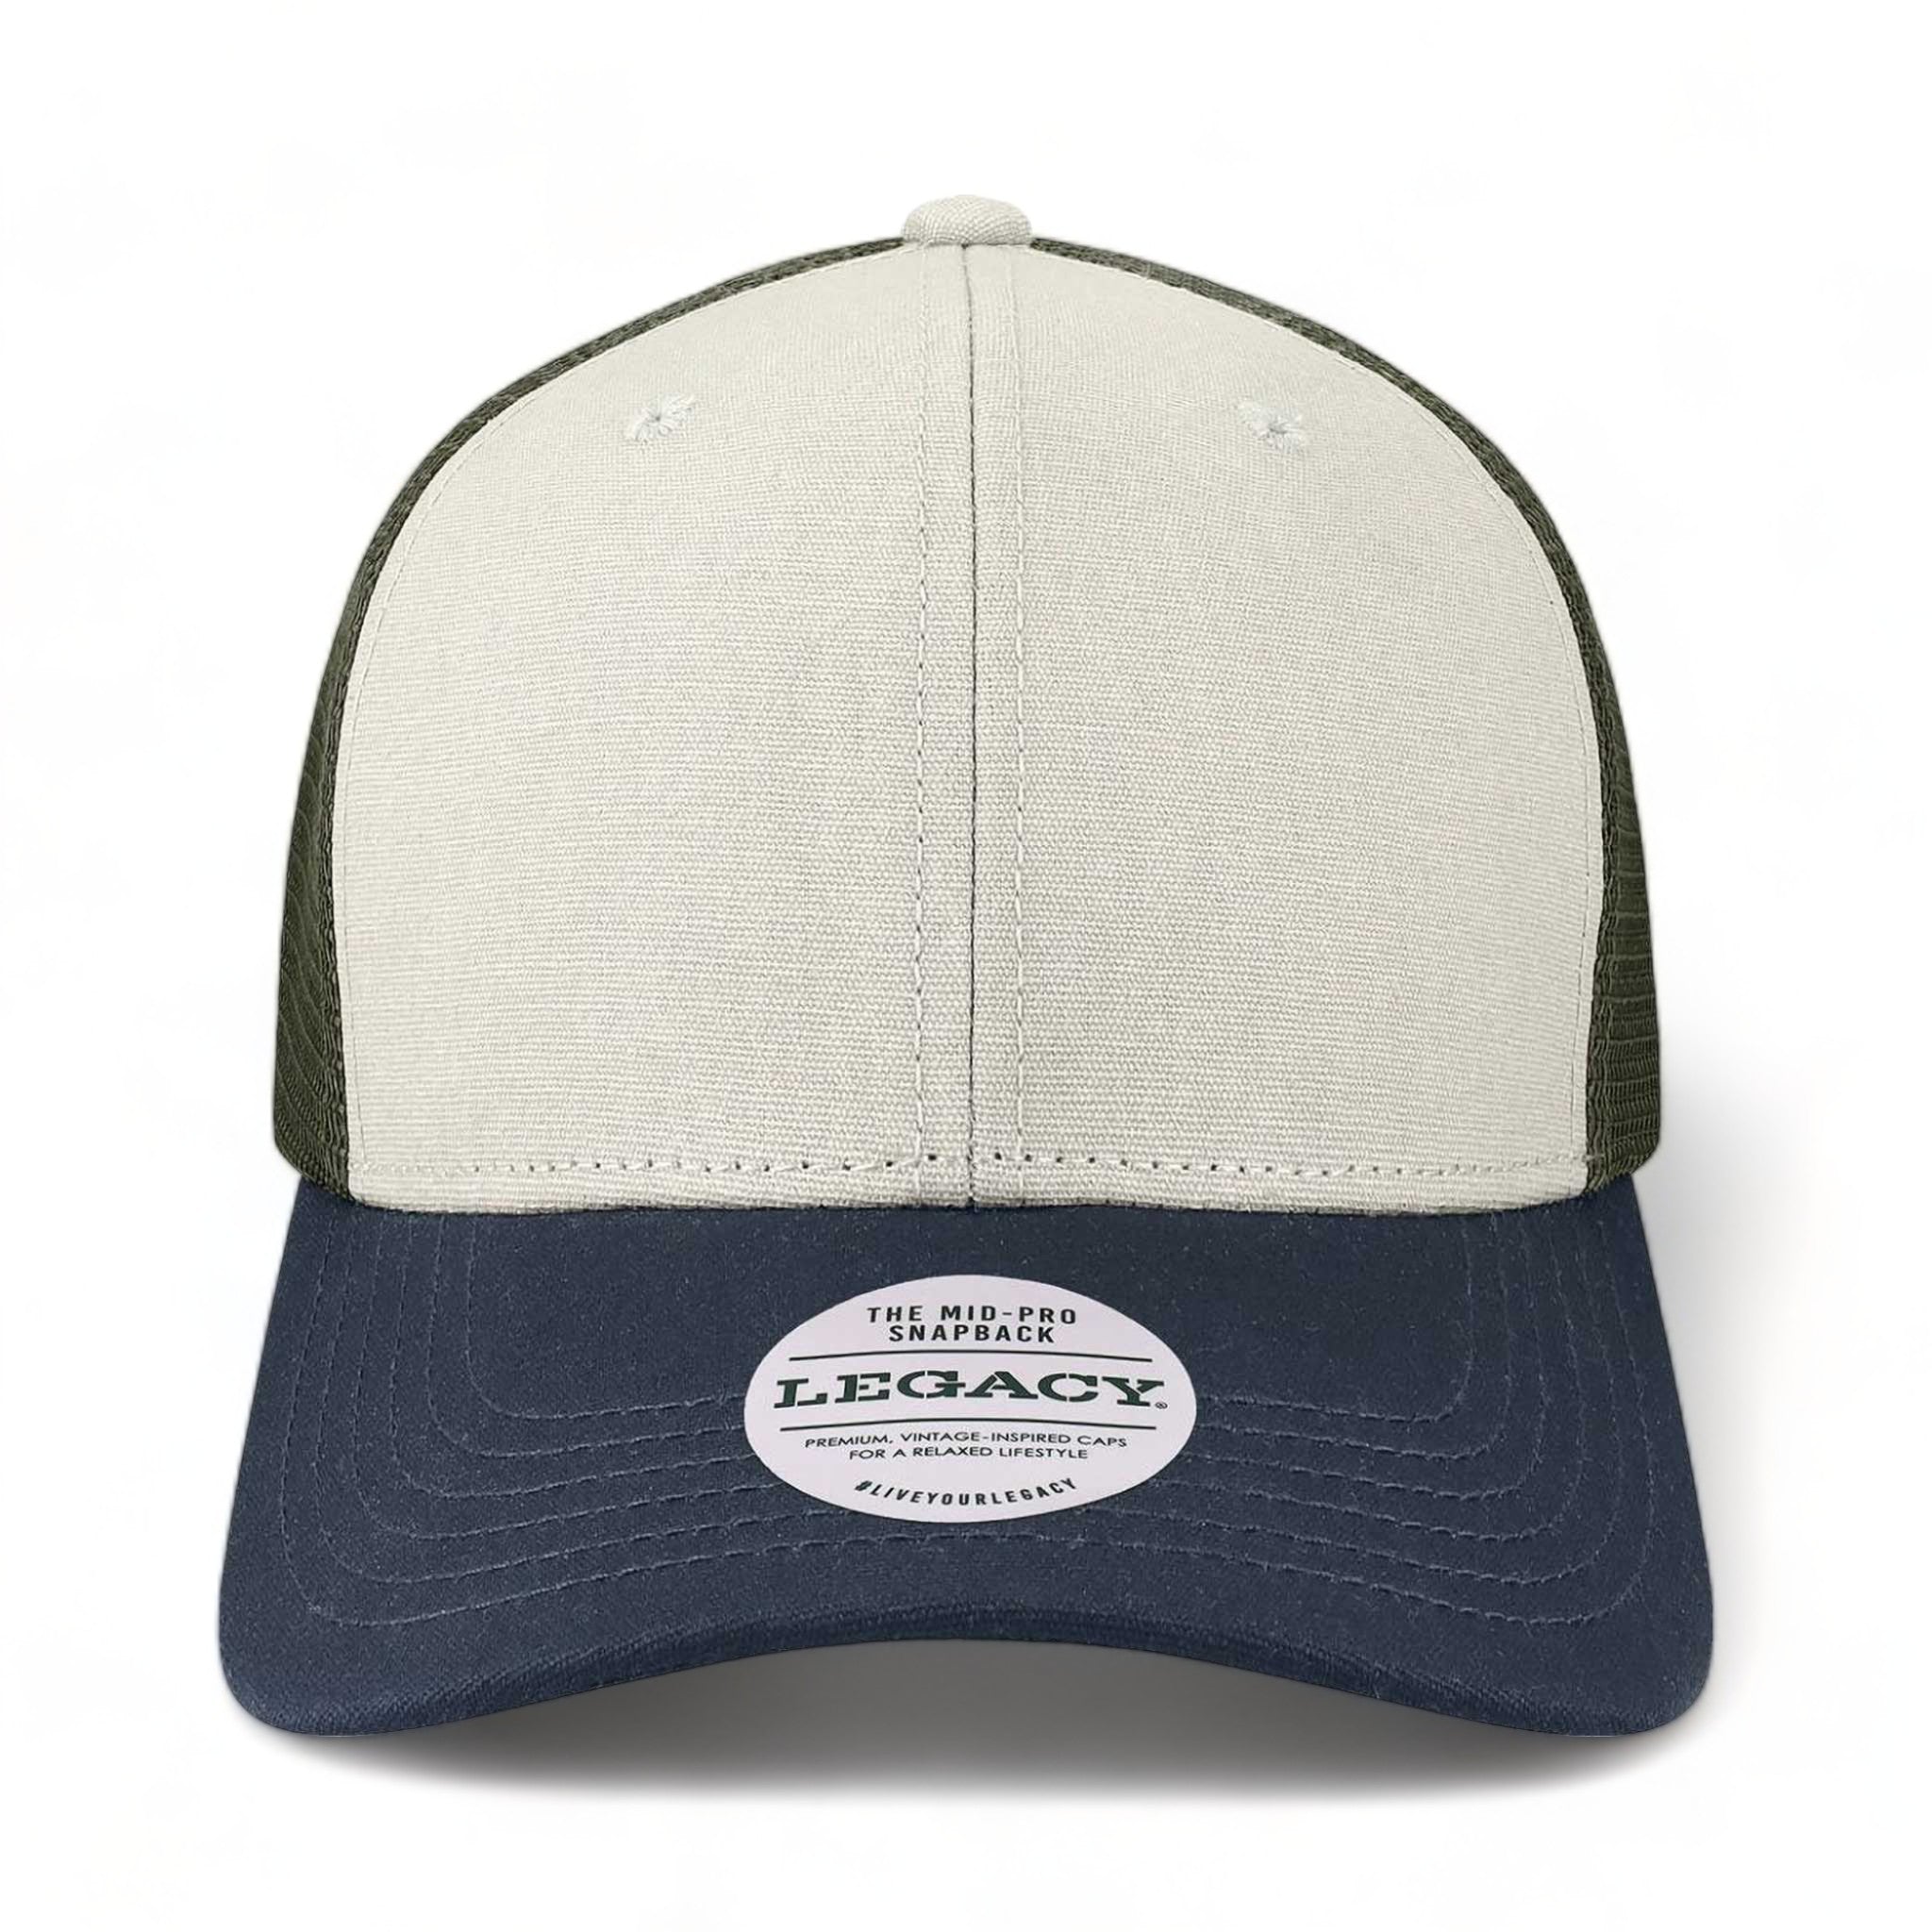 Front view of LEGACY MPS custom hat in tan, navy and olive green